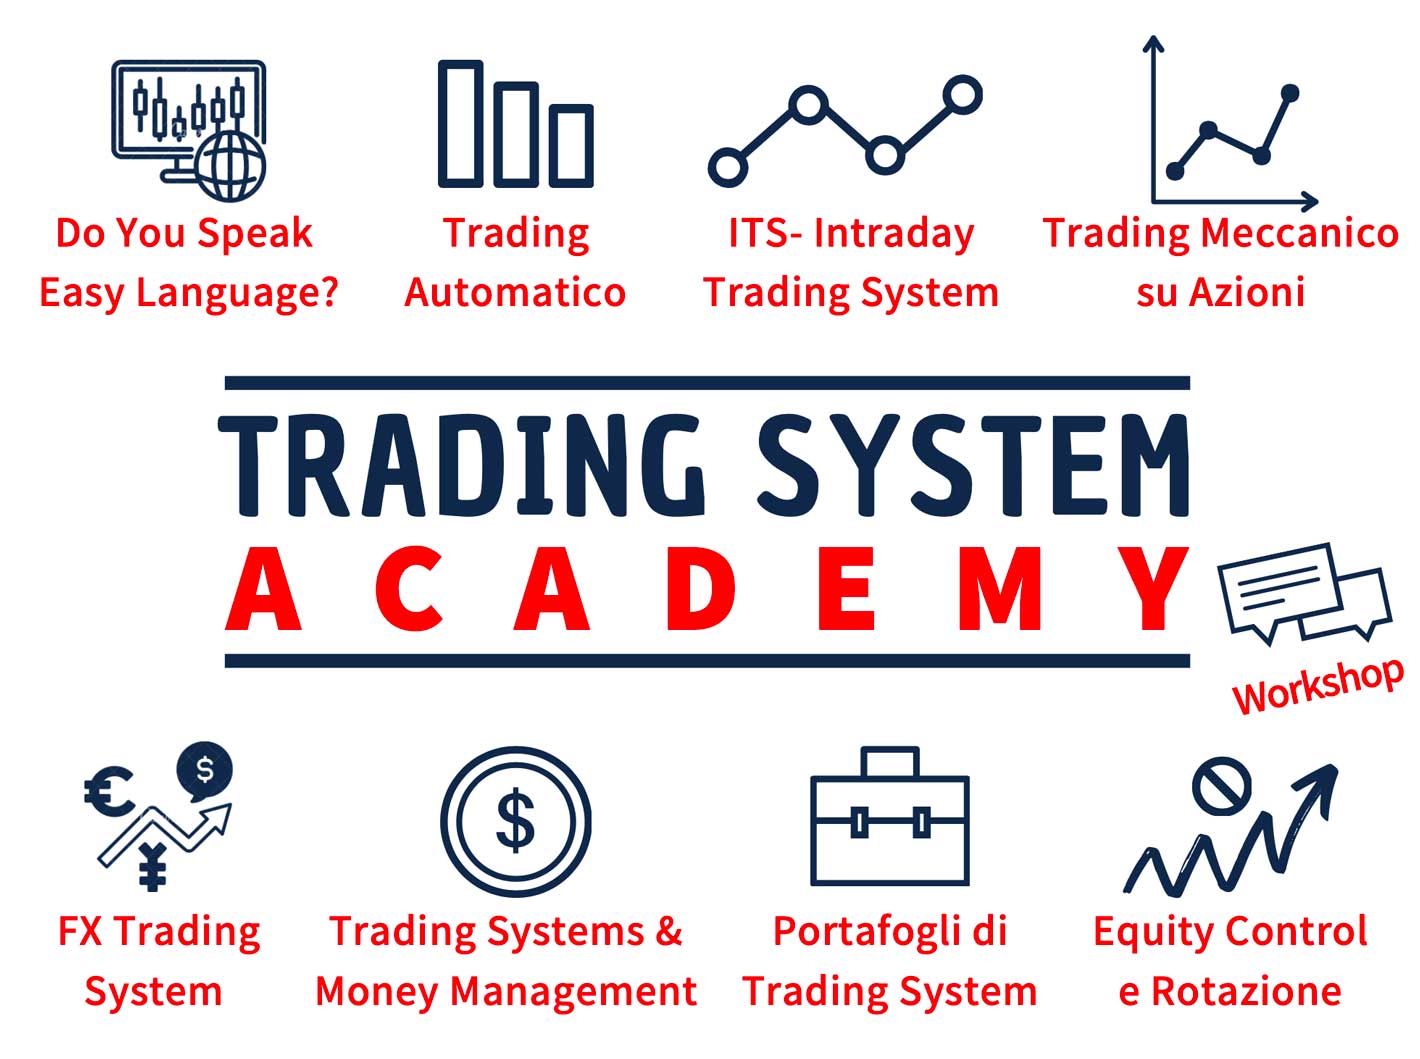 qtlab trading academy: miglior corso trading system and methods, online trading system e come costruire trading system automatico